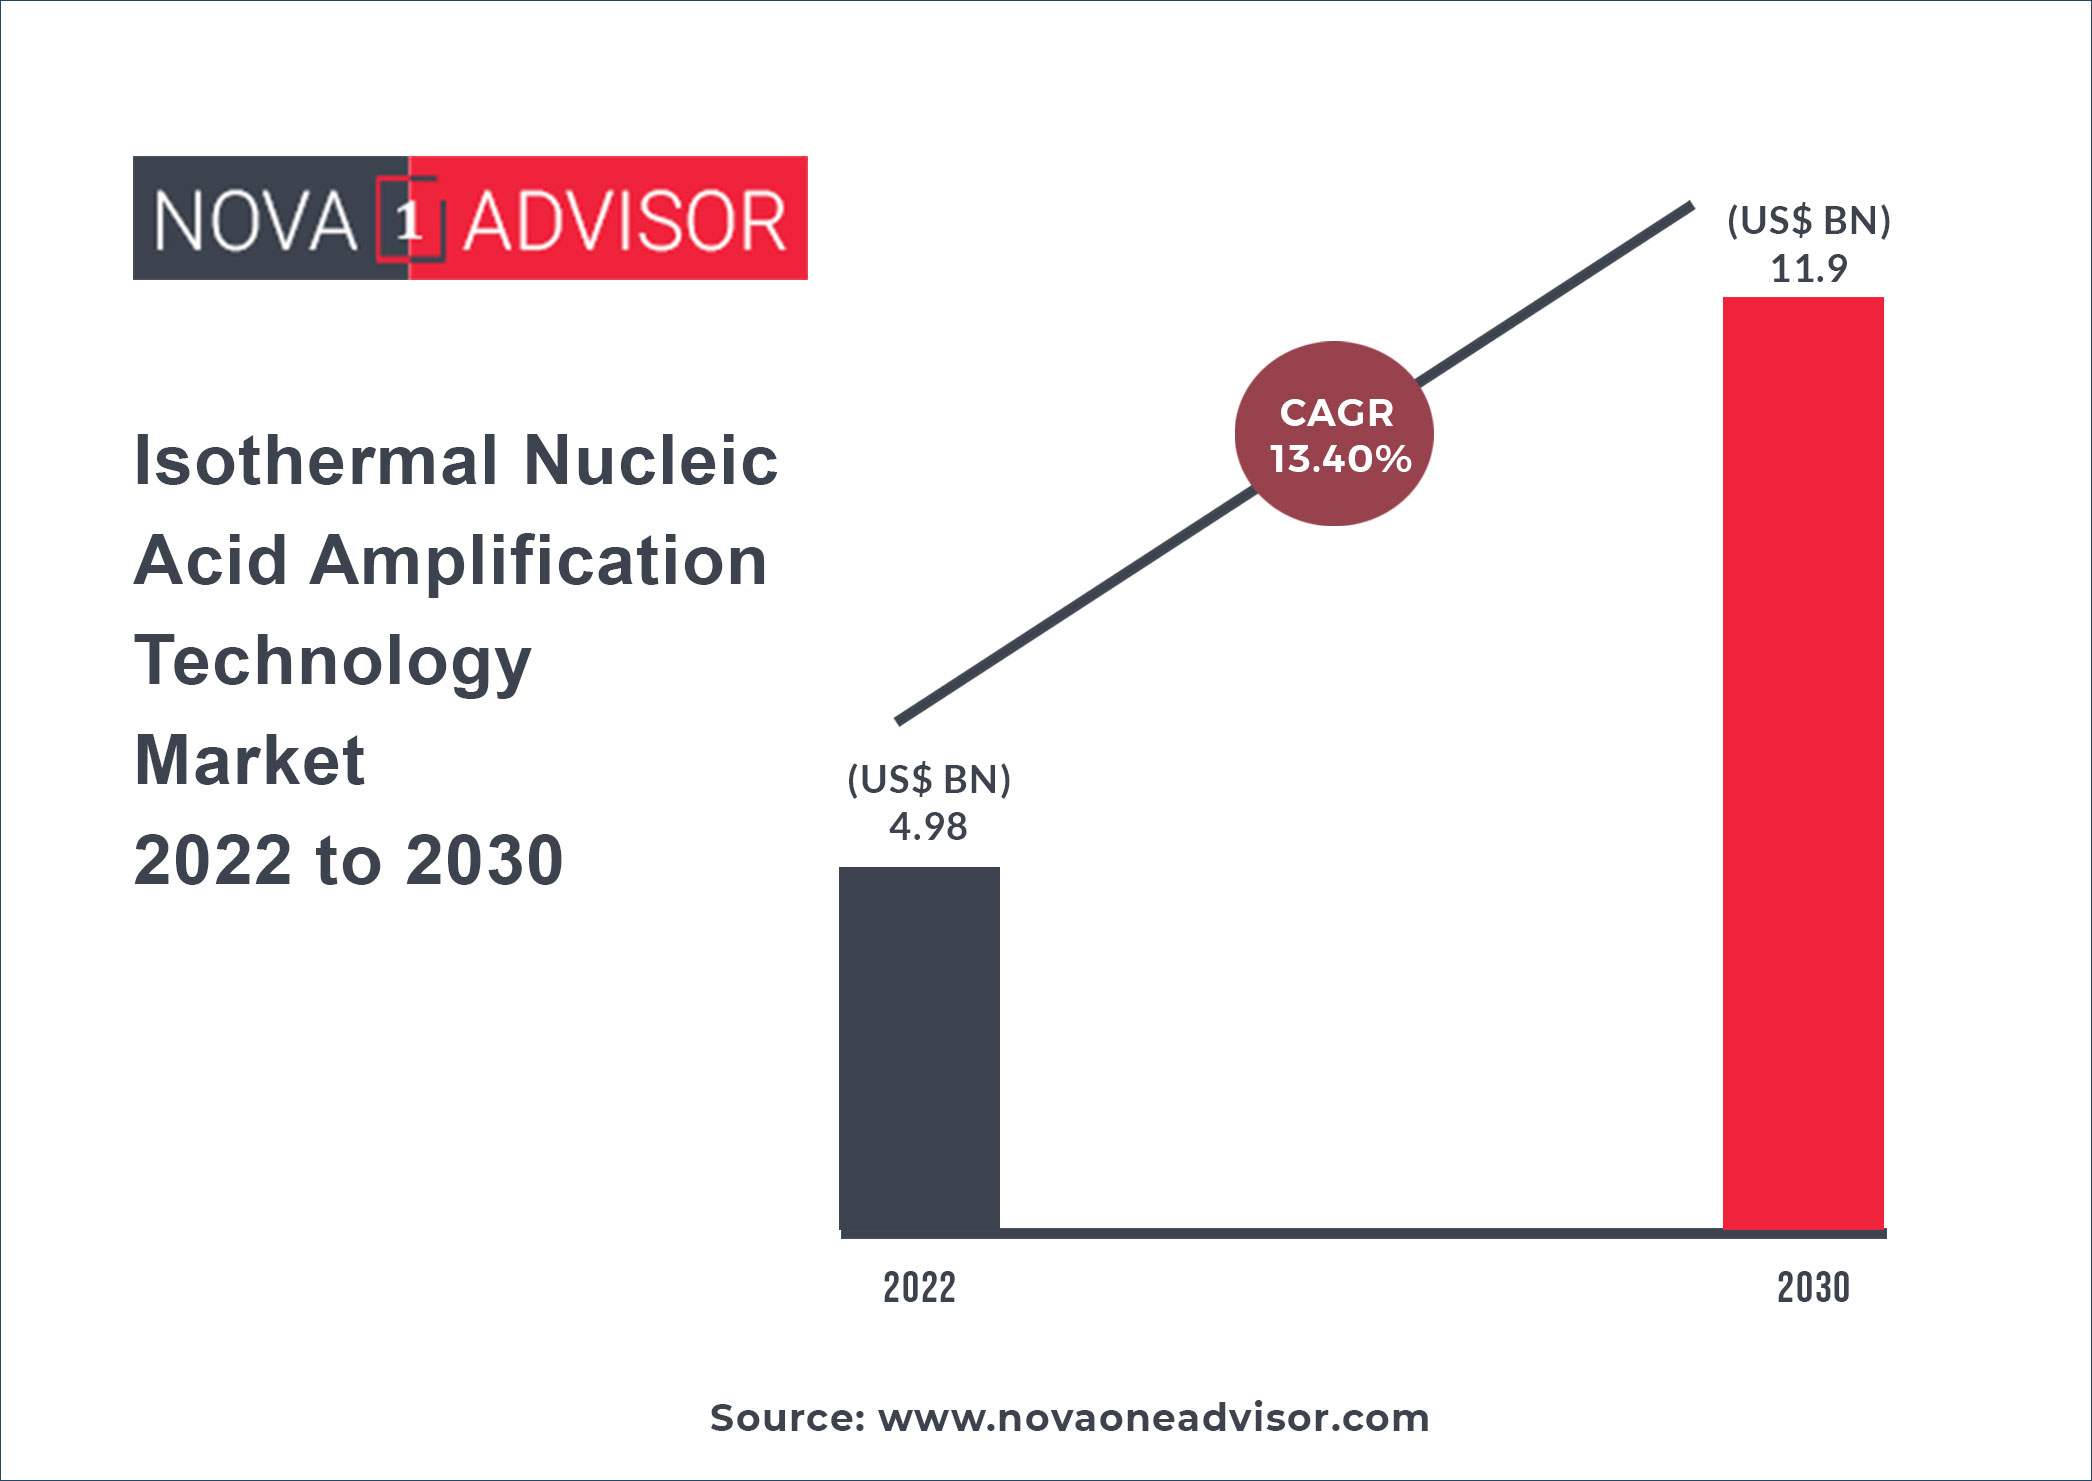 https://www.novaoneadvisor.com/reportimg/Isothermal-Nucleic-Acid-Amplification-Technology-Market-2022-to-2030.jpg